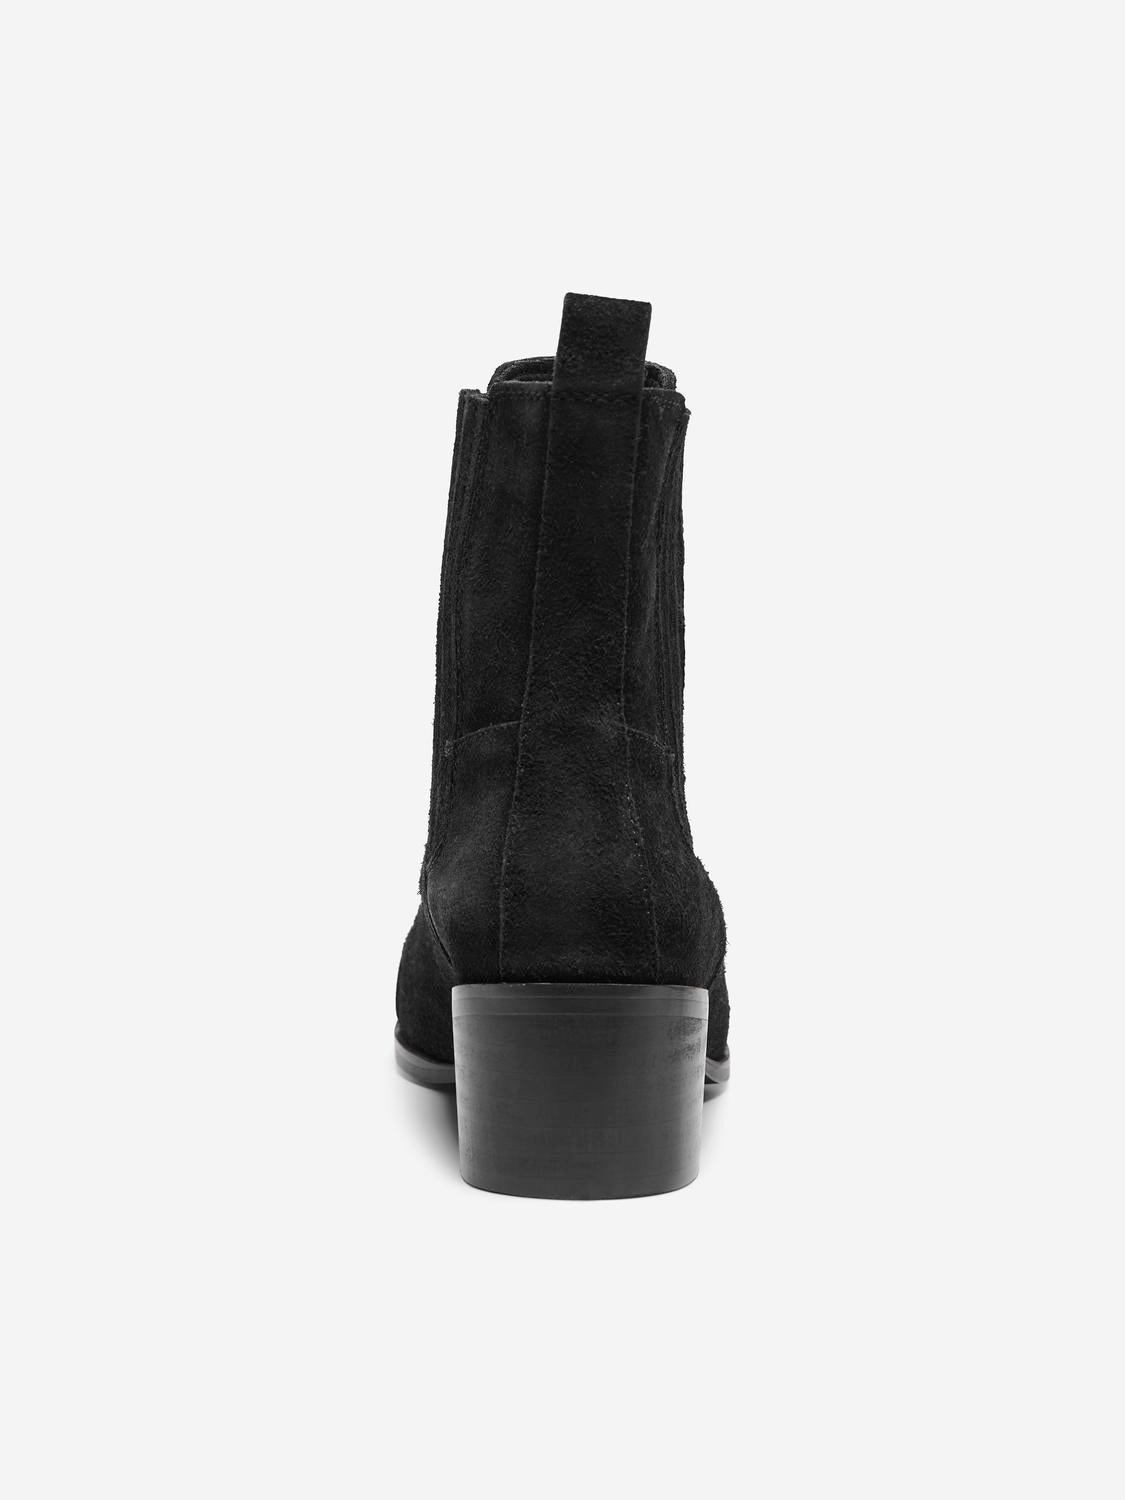 ONLY Bottes Bout pointu -Black - 15287475